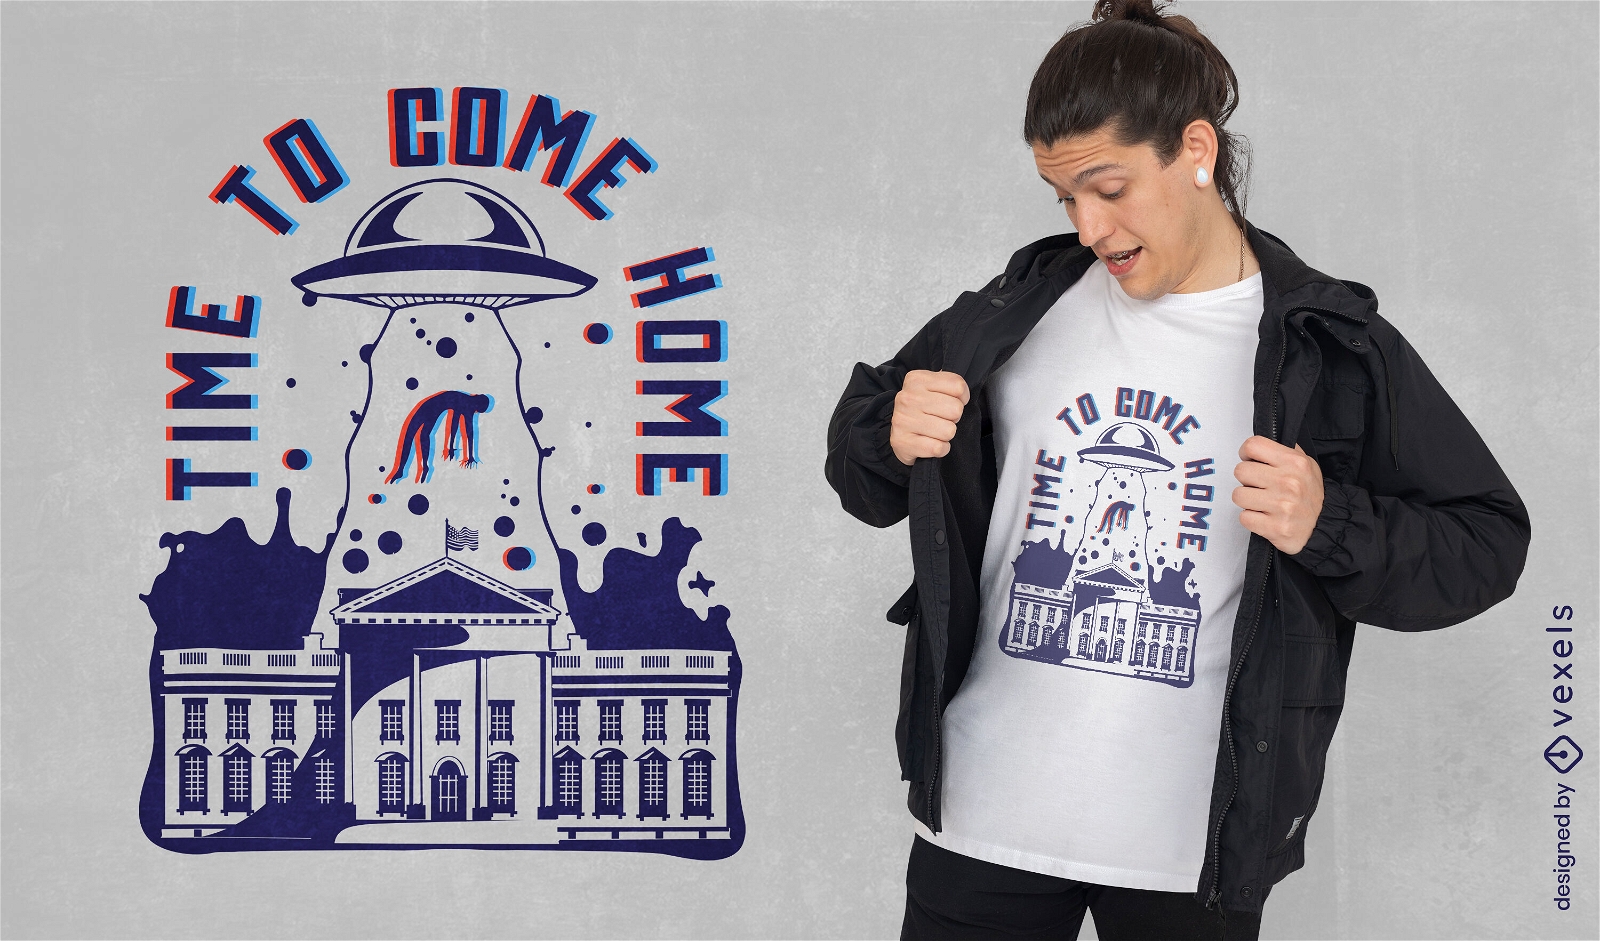 Alien abduction from white house t-shirt design